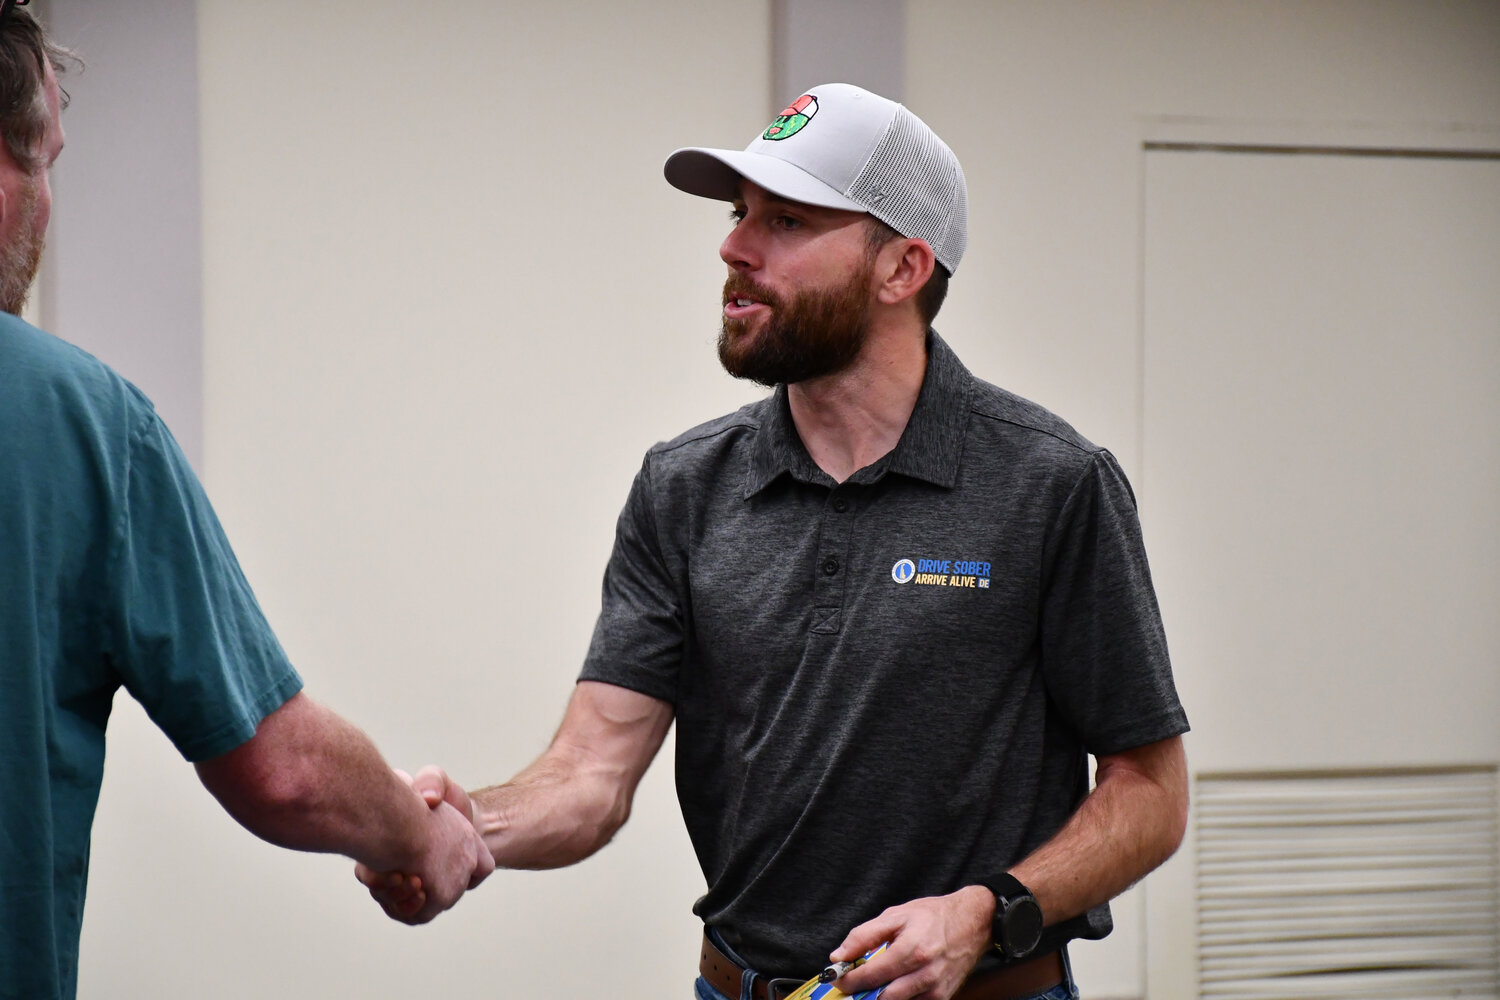 Ross Chastain is the driver of the No. 1 Chevrolet for Trackhouse Racing in the NASCAR Cup Series. He also works with the Delaware Office of Highway Safety on the "Protect Your Melon" campaign, which he promoted Thursday at the Delaware Agricultural Museum and Village.